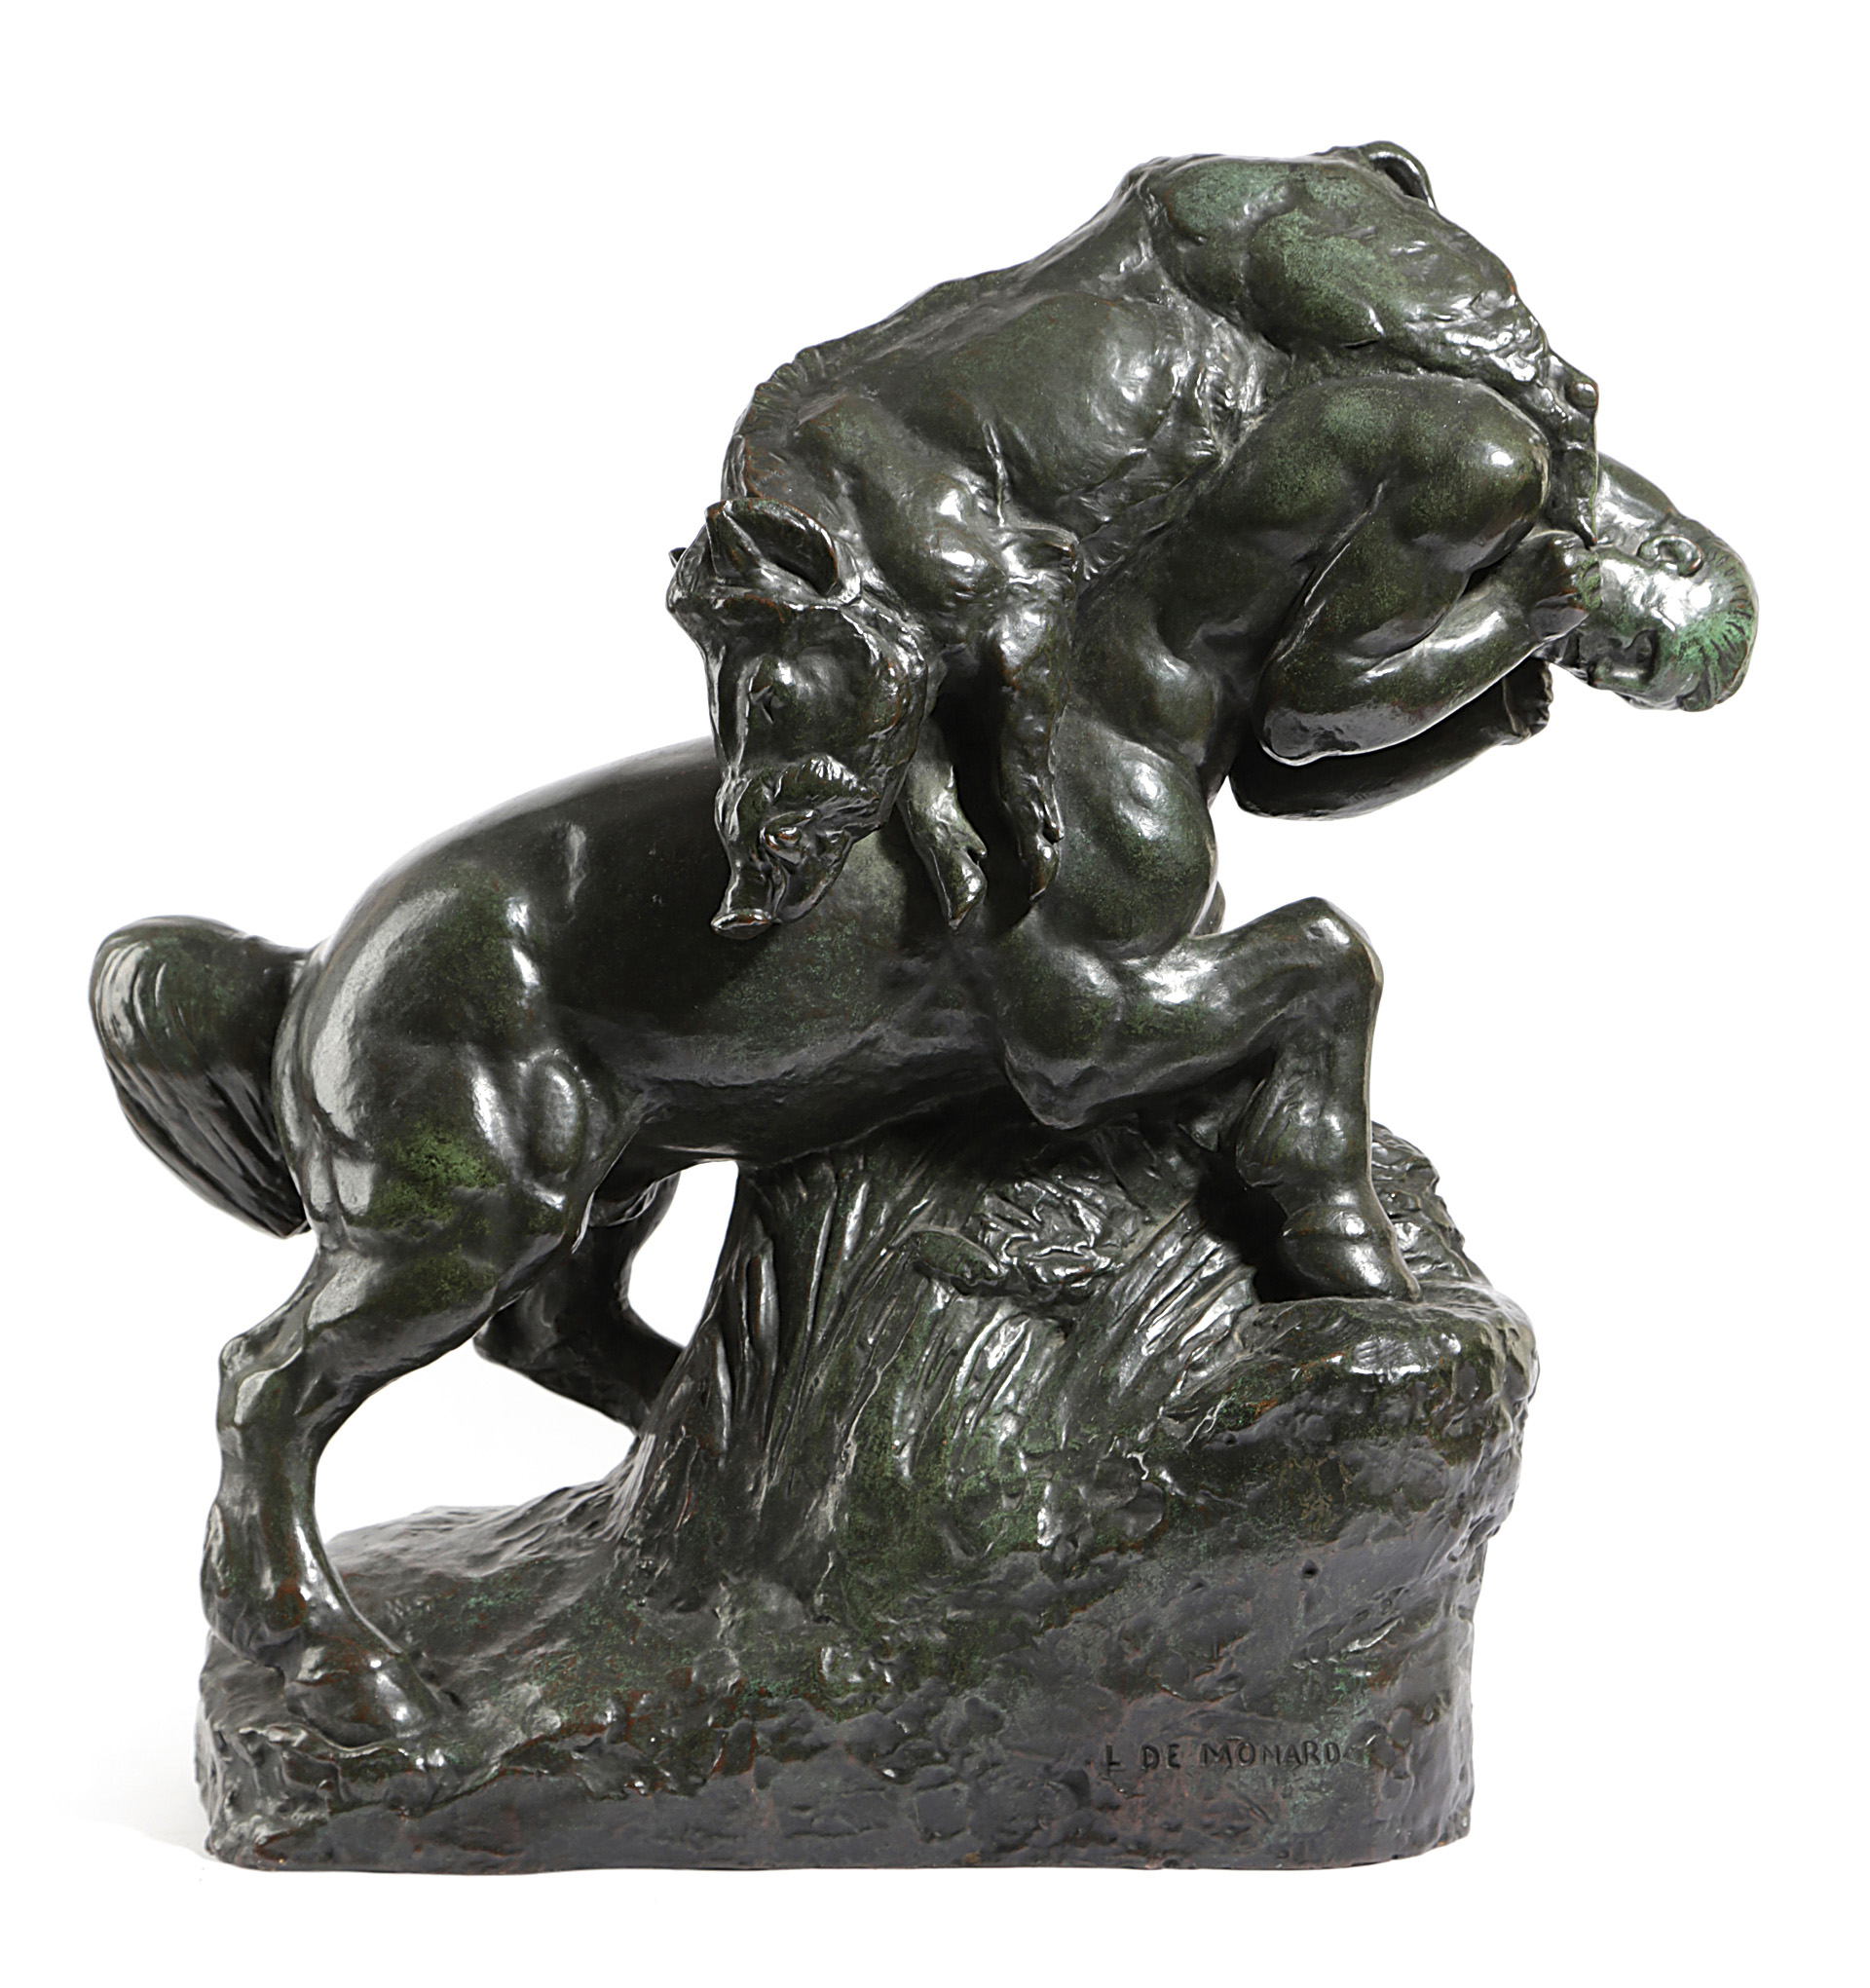 A FRENCH BRONZE GROUP OF A CENTAUR AND A WILD BOAR BY LOUIS DE MONARD (FRENCH 1873-1939) with a